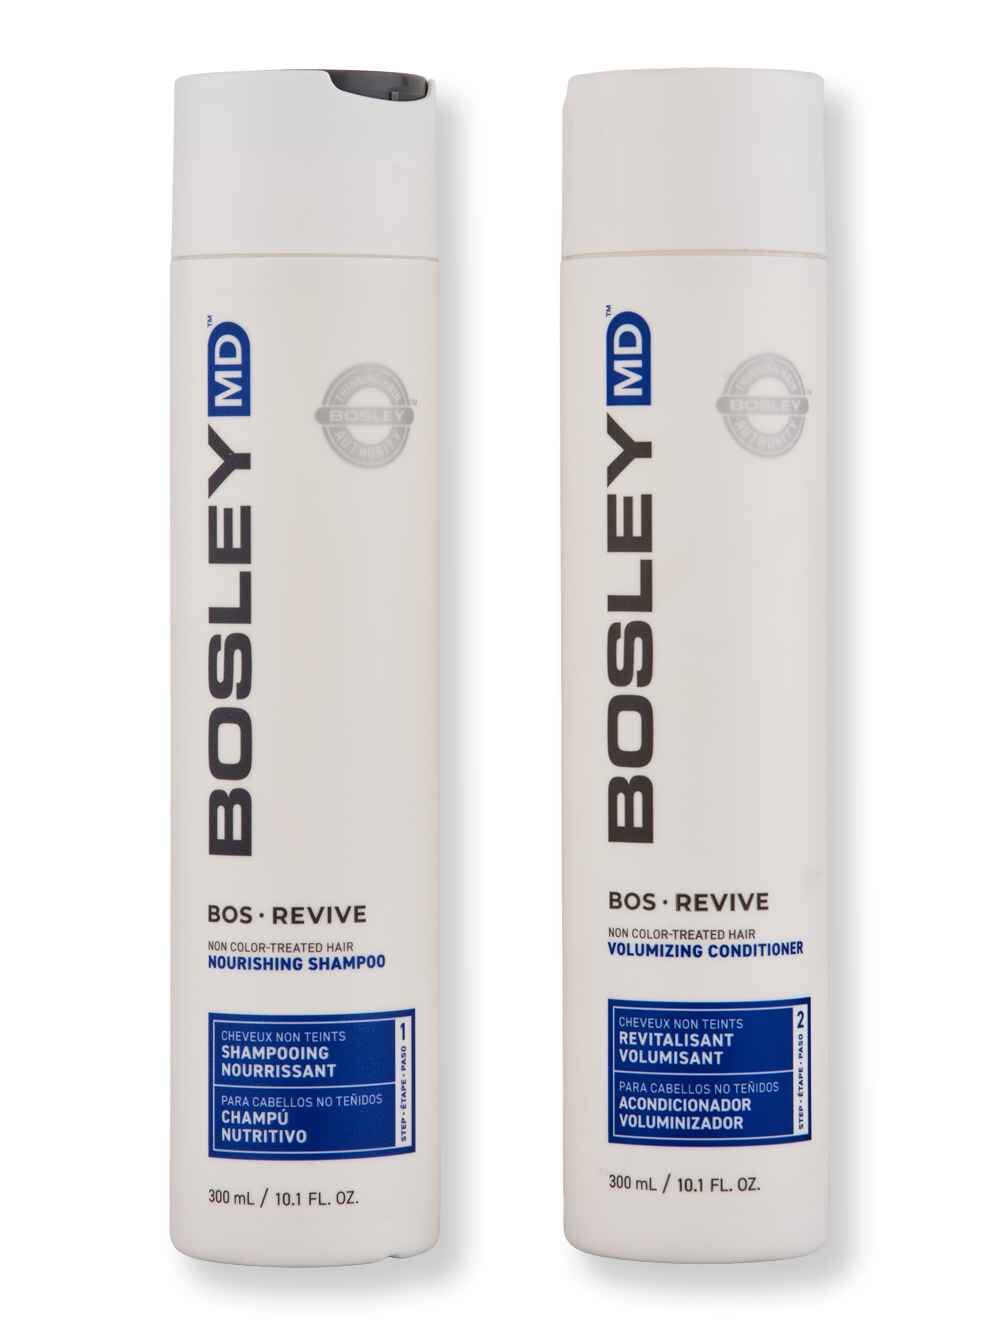 Bosley Bosley BosRevive Shampoo & Conditioner For Non Color-Treated Hair 10.1 oz Hair Care Value Sets 